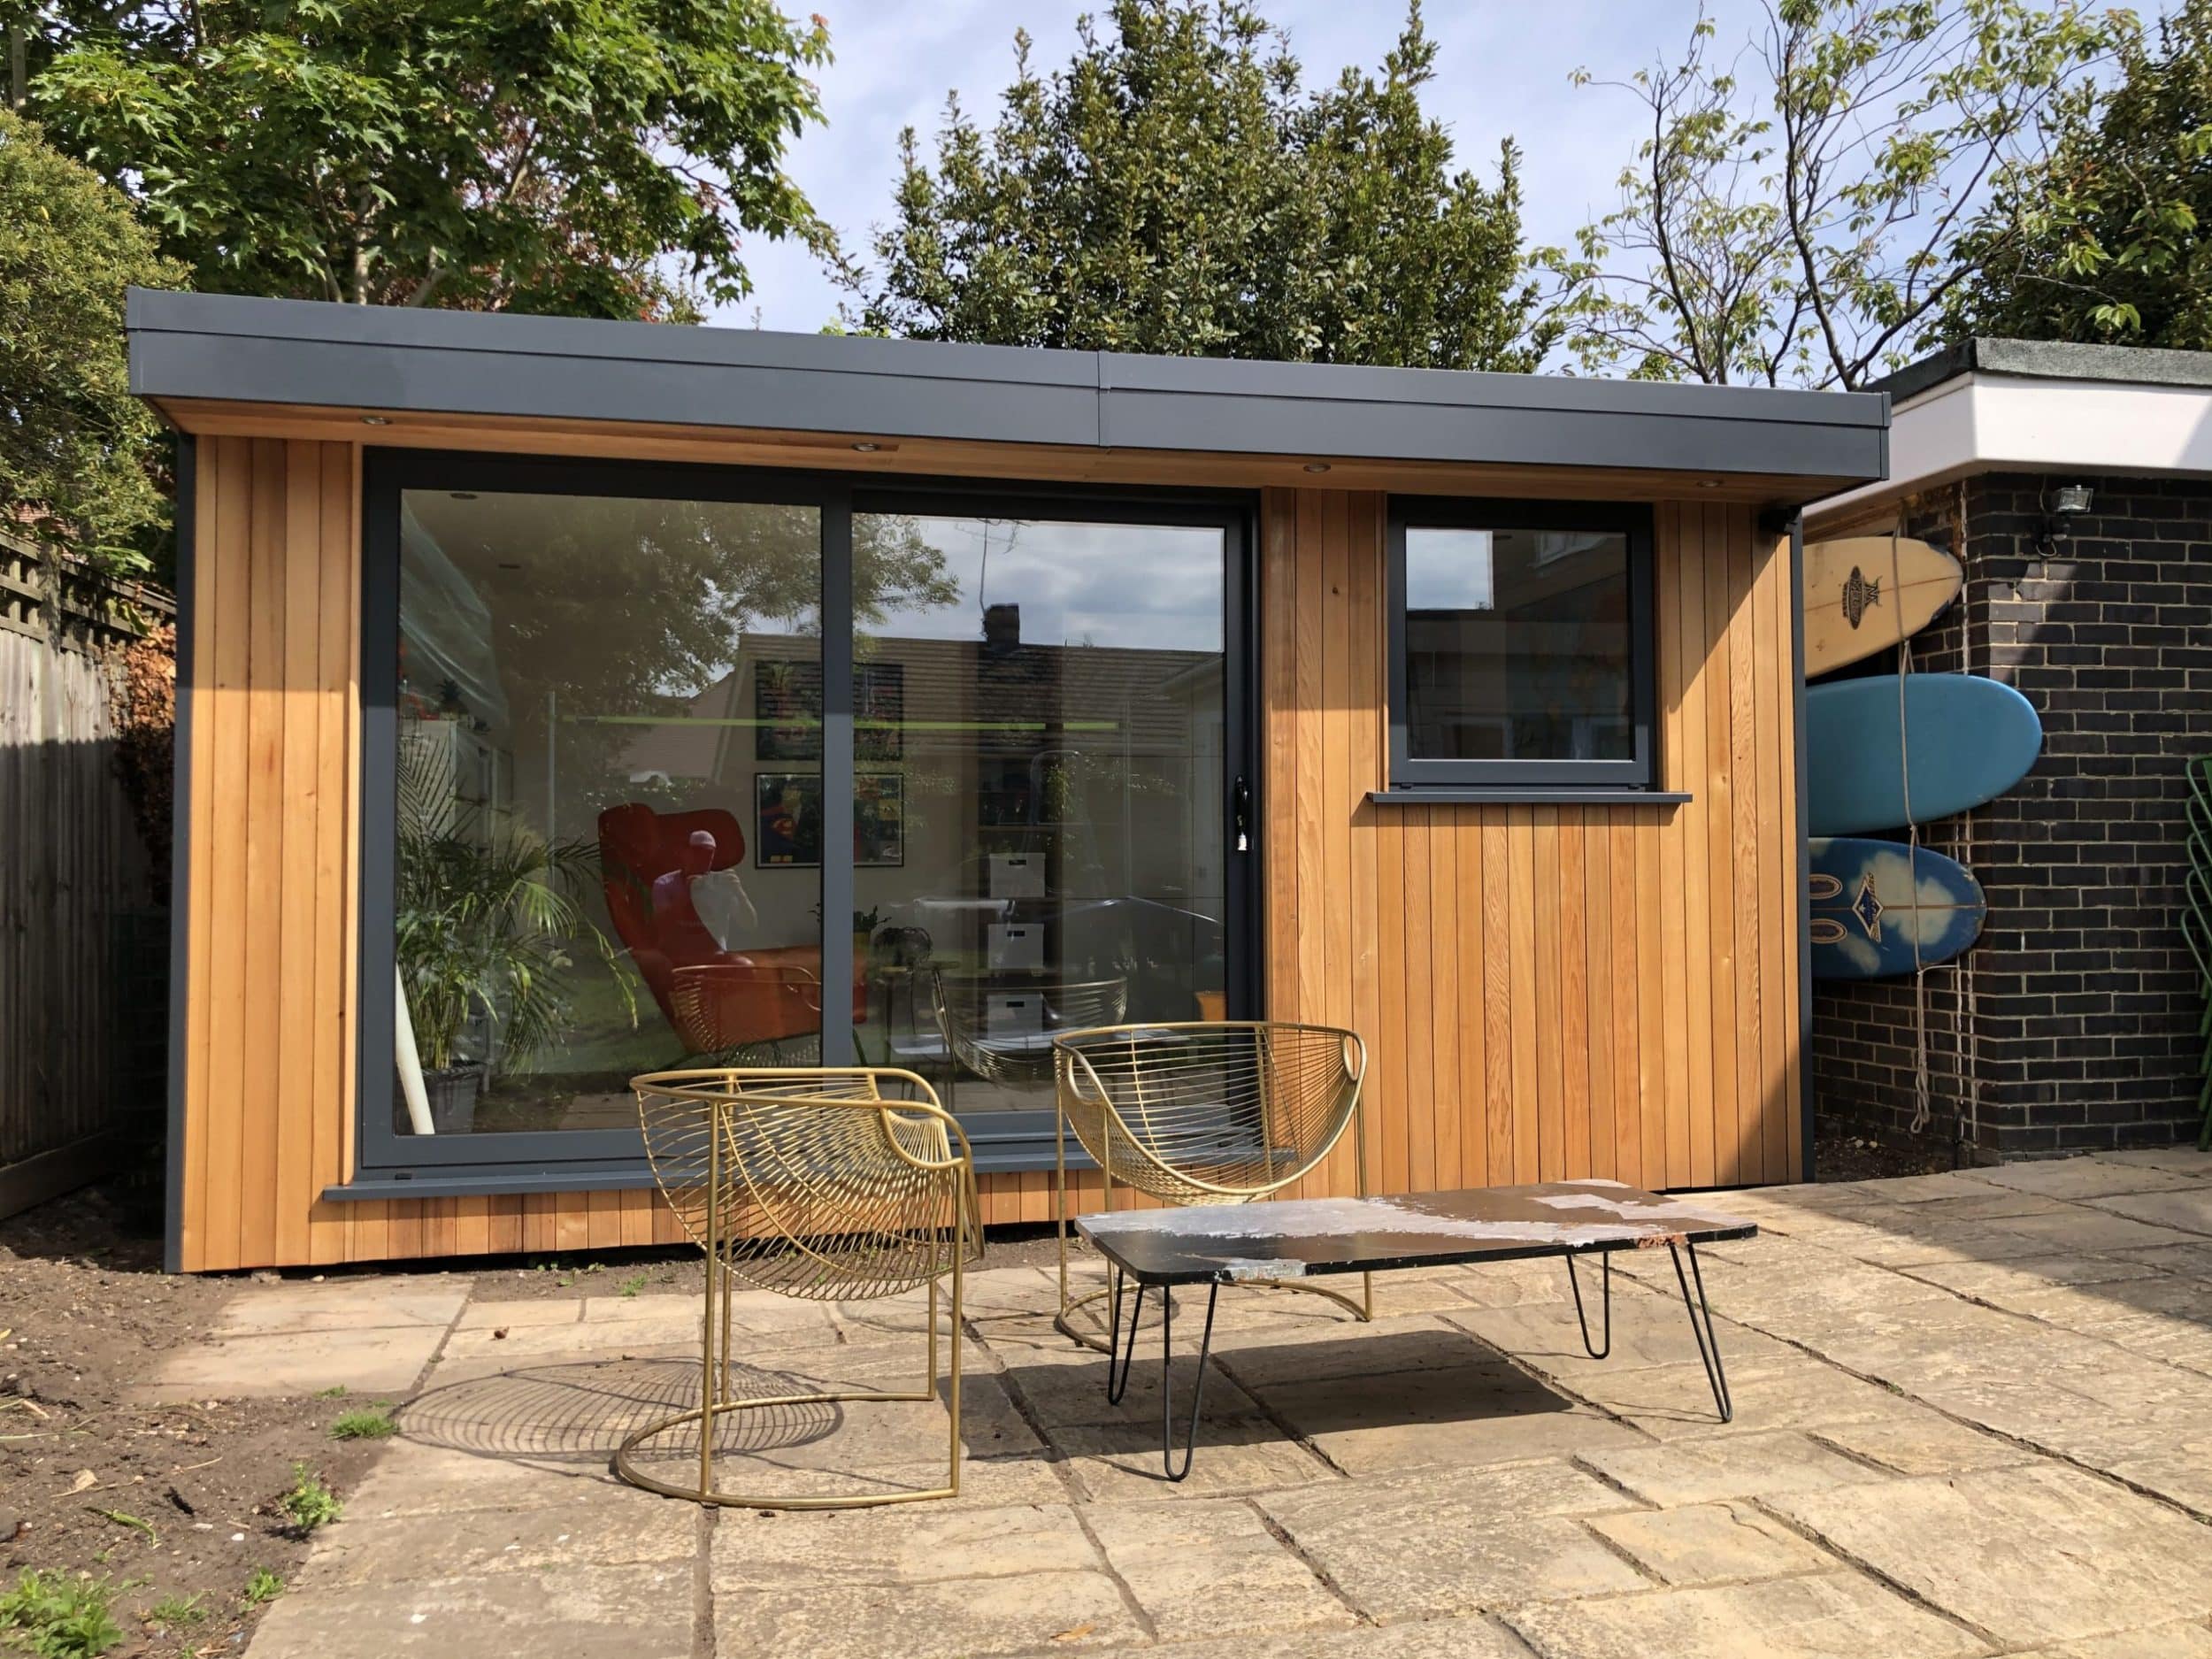 Building a bespoke garden office in Whitstable whilst adhering to lock-down guidelines